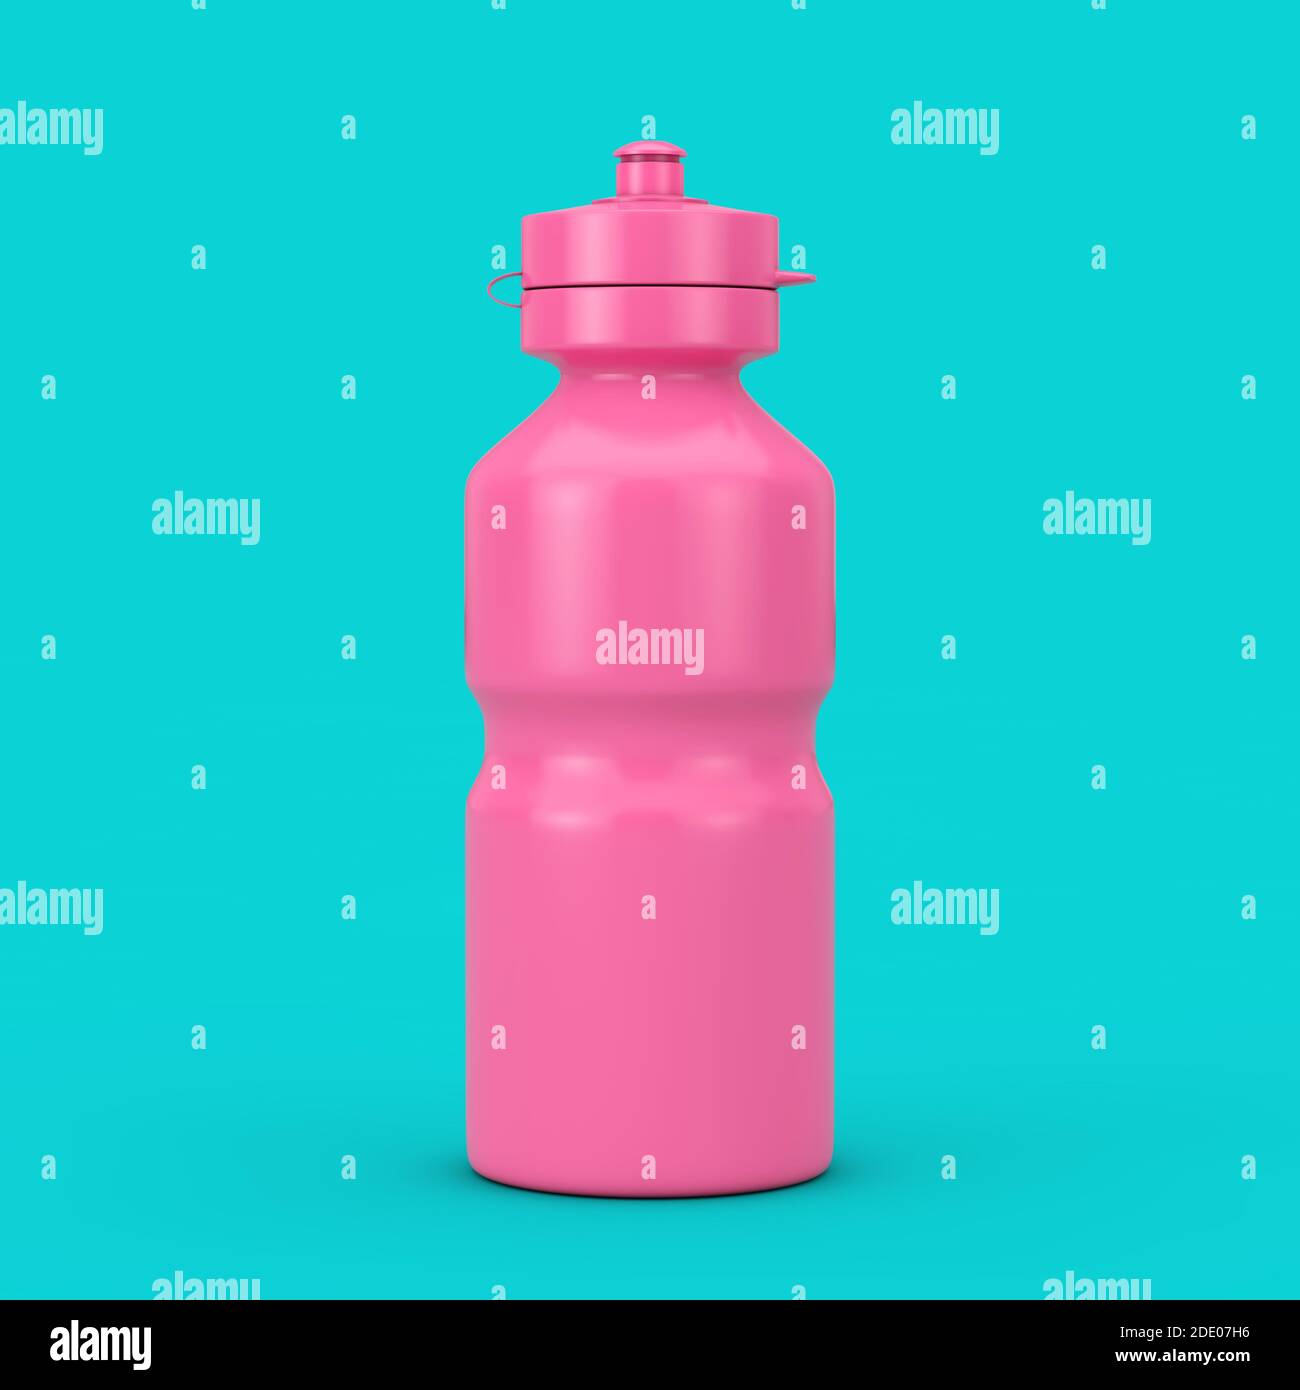 Download Bike Water Sport Bottle Mockup In Duotone Style On A Blue Background 3d Rendering Stock Photo Alamy